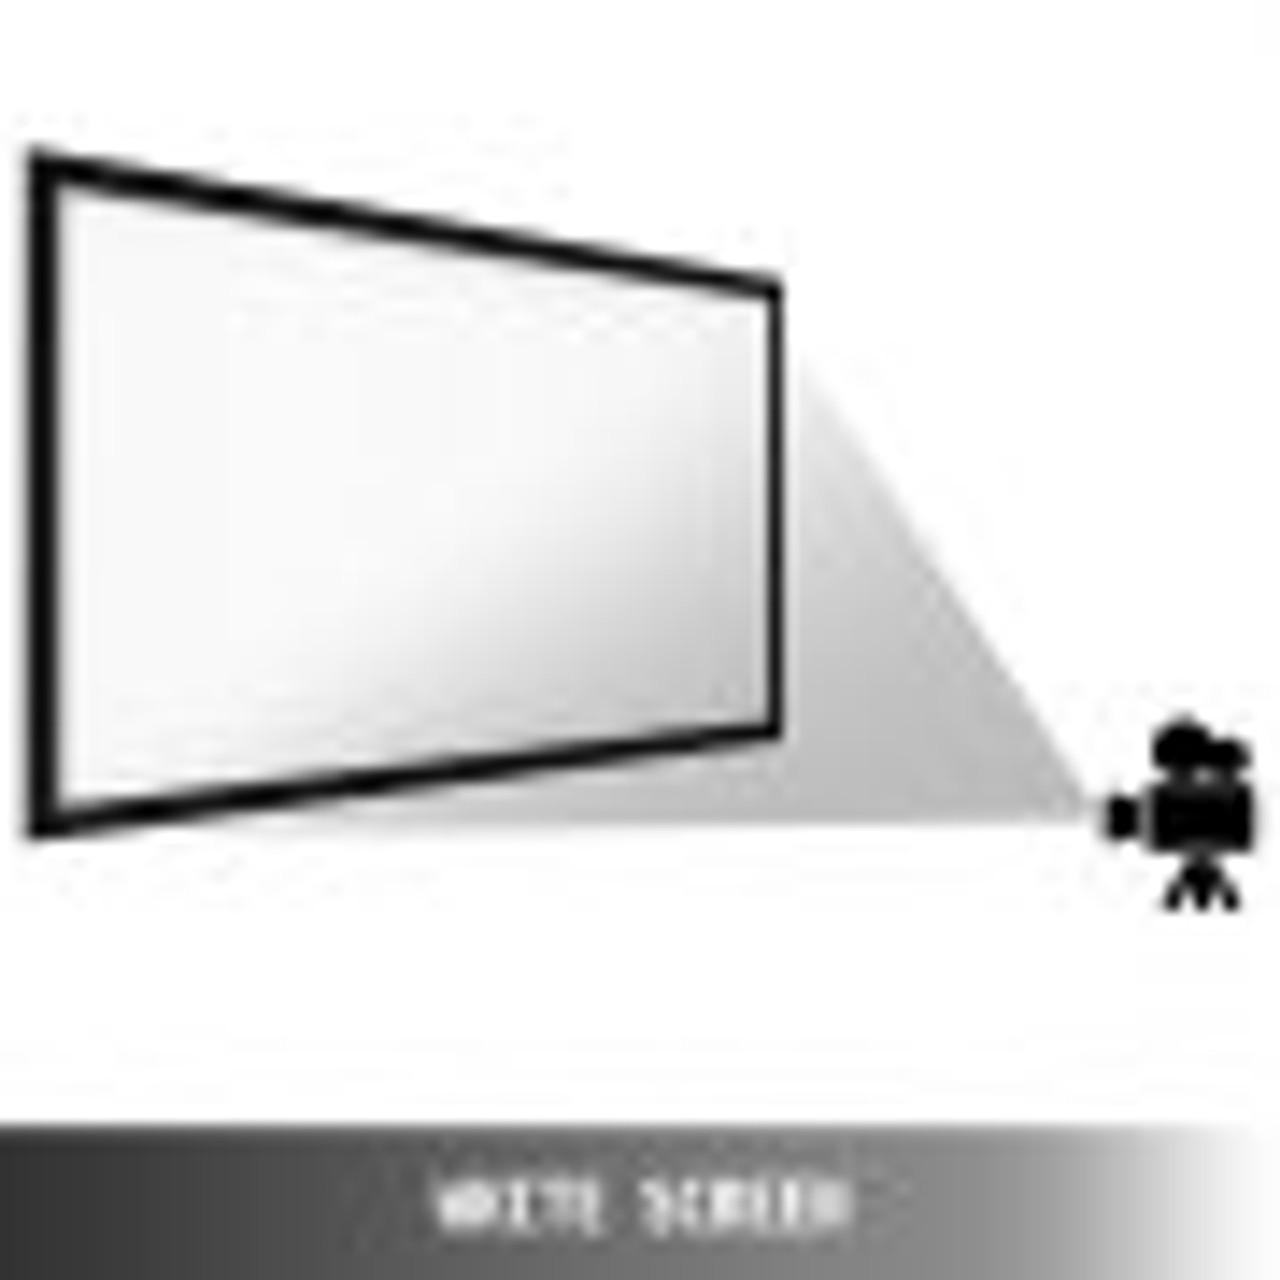 Projector Screen Fixed Frame 110inch Diagonal 16:9 4K HD Movie Projector Screen with Aluminum Frame Projector Screen Wall Mounted for Home Theater Office Use